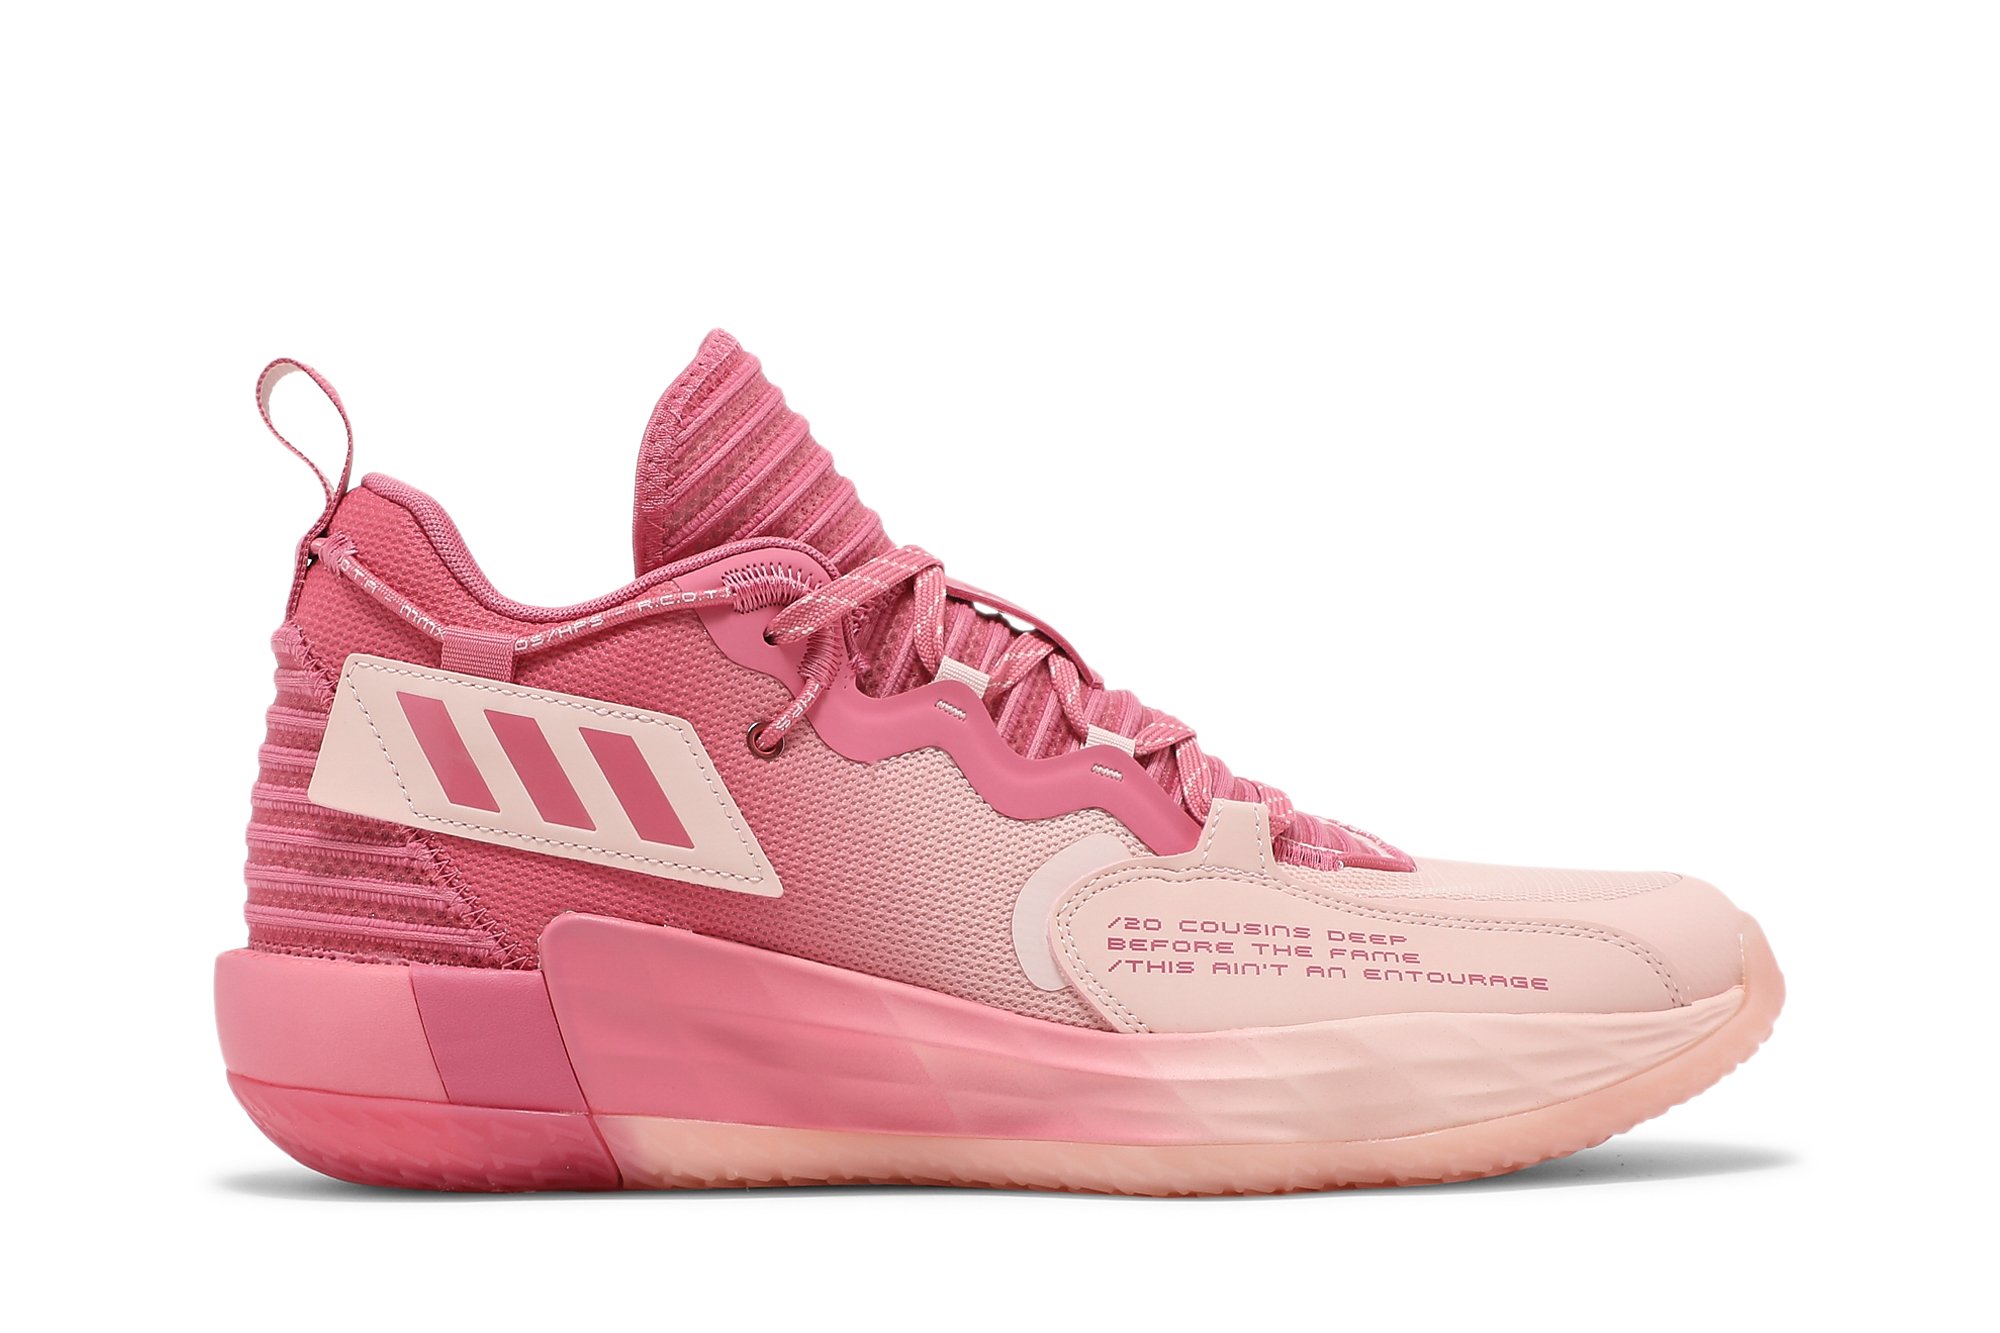 dame 7 extply shoes pink